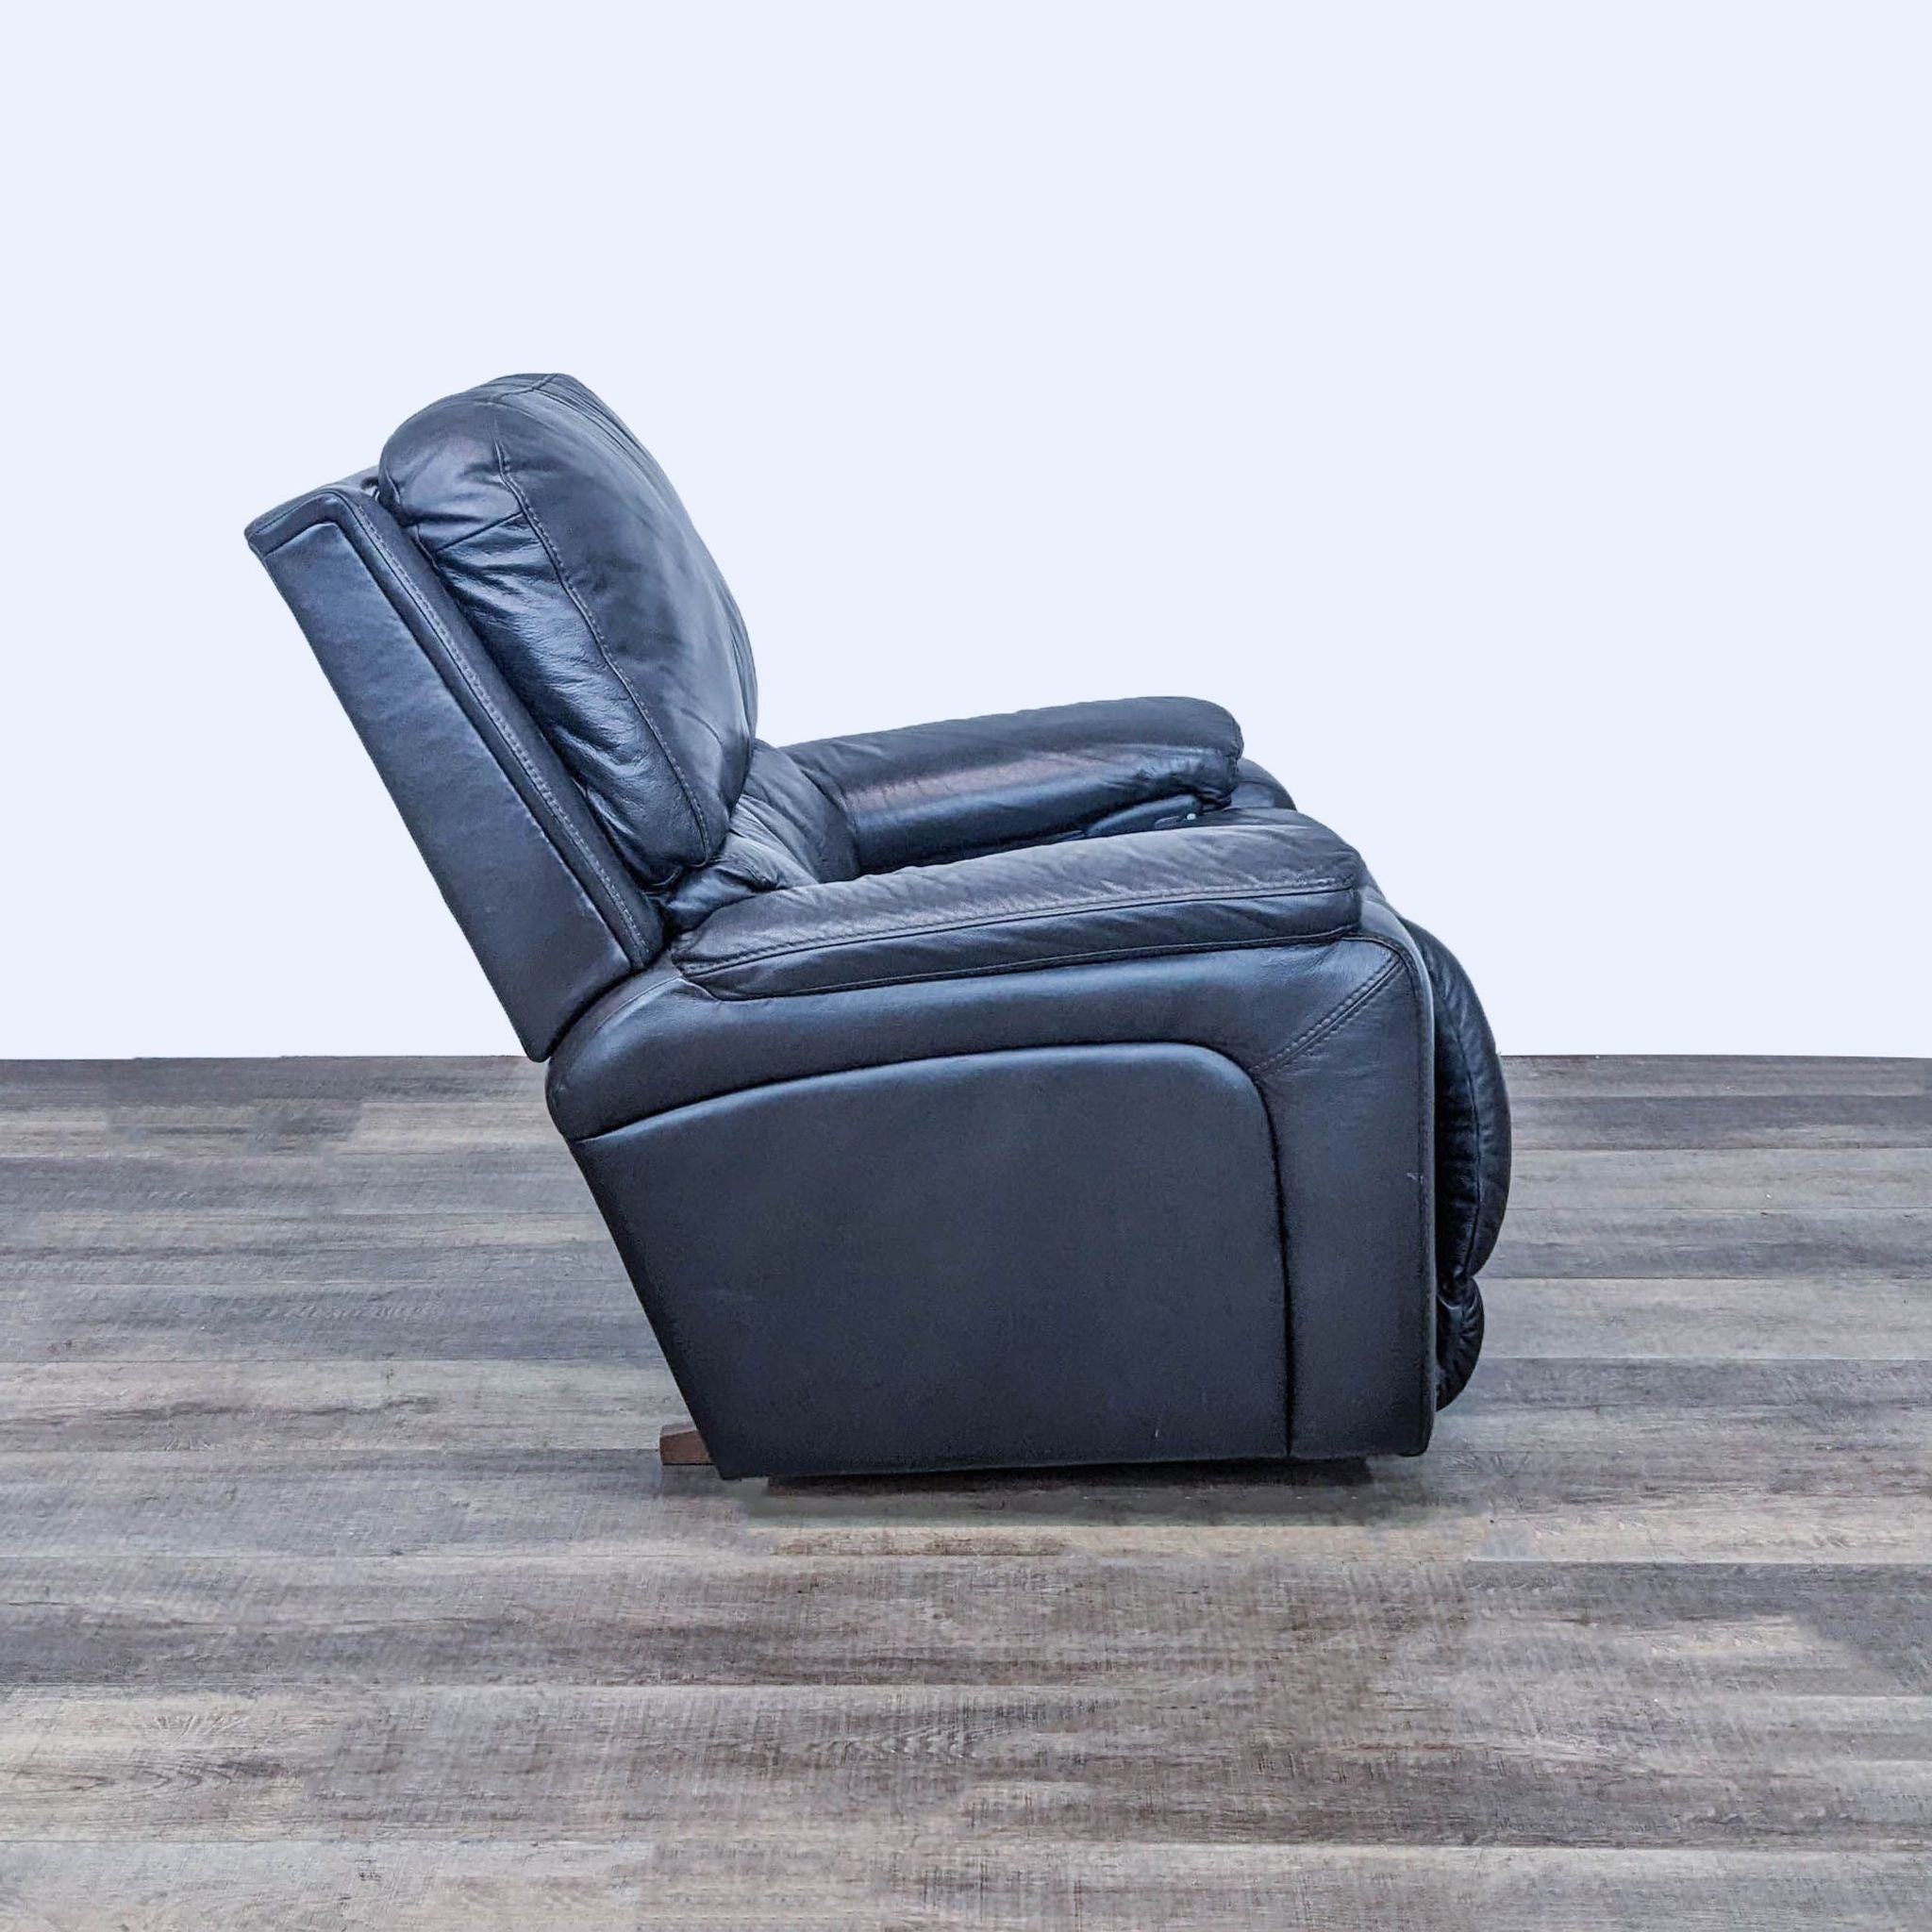 The Greyson power recliner by La-Z-Boy, featuring power recline buttons for back, legrest, headrest, and lumbar massage functions.